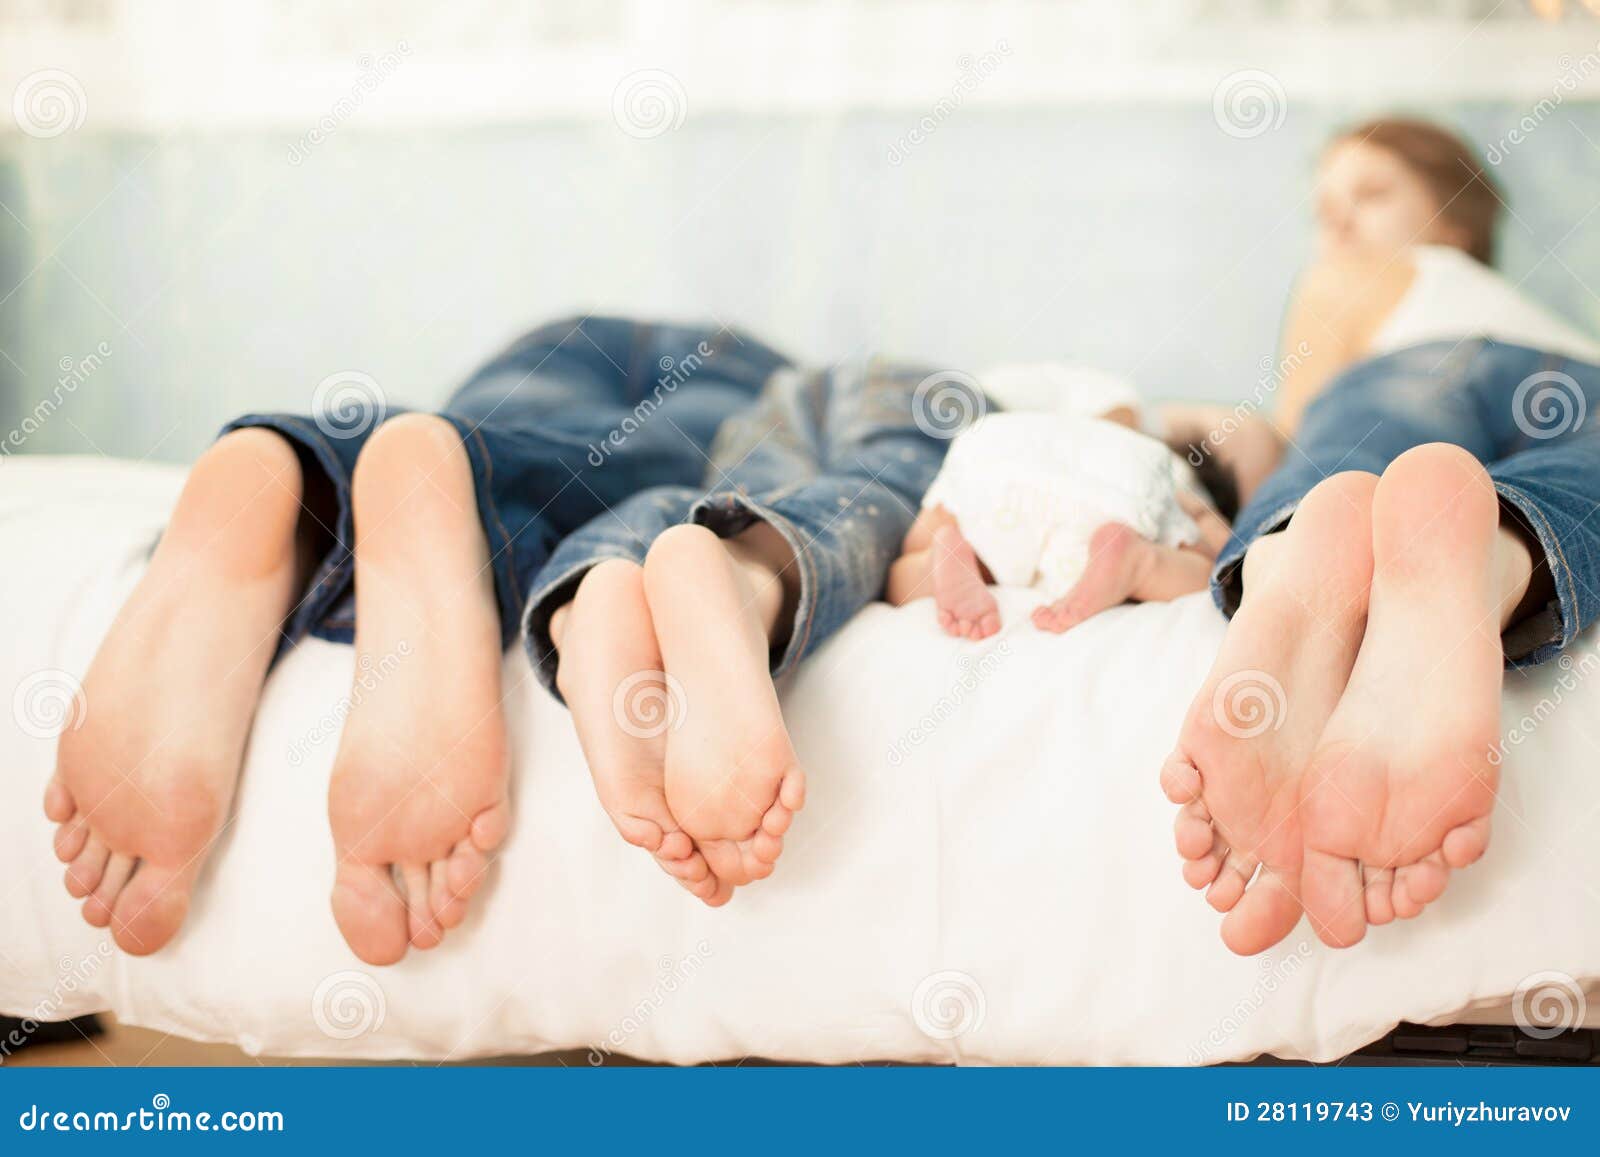 Pictures of Families Their Feet in the Bed